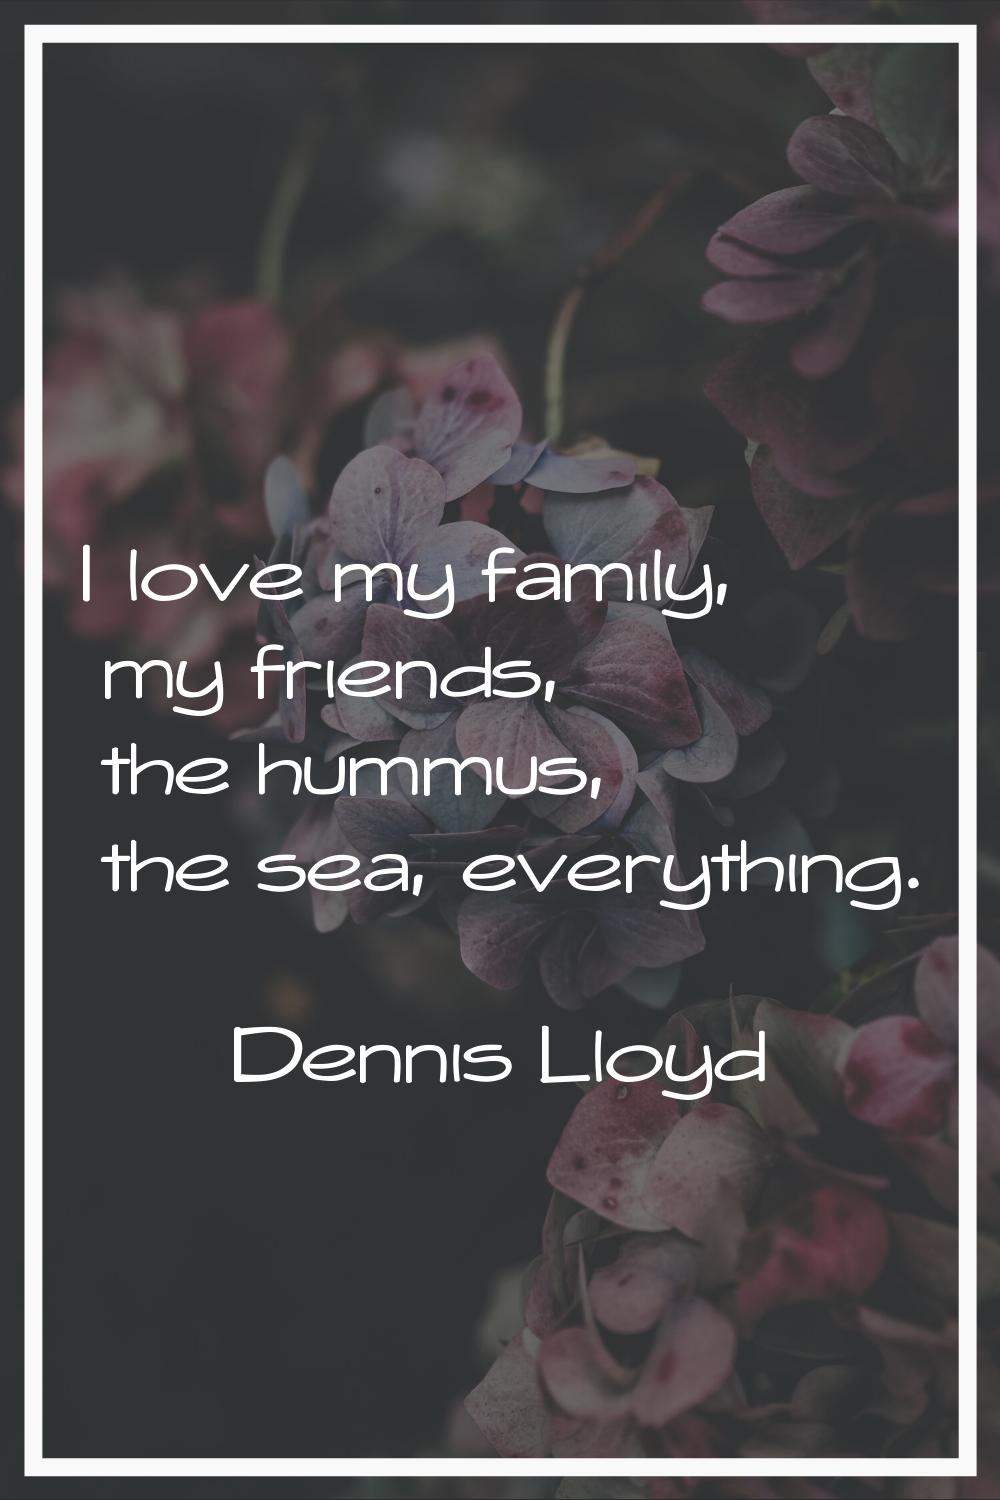 I love my family, my friends, the hummus, the sea, everything.